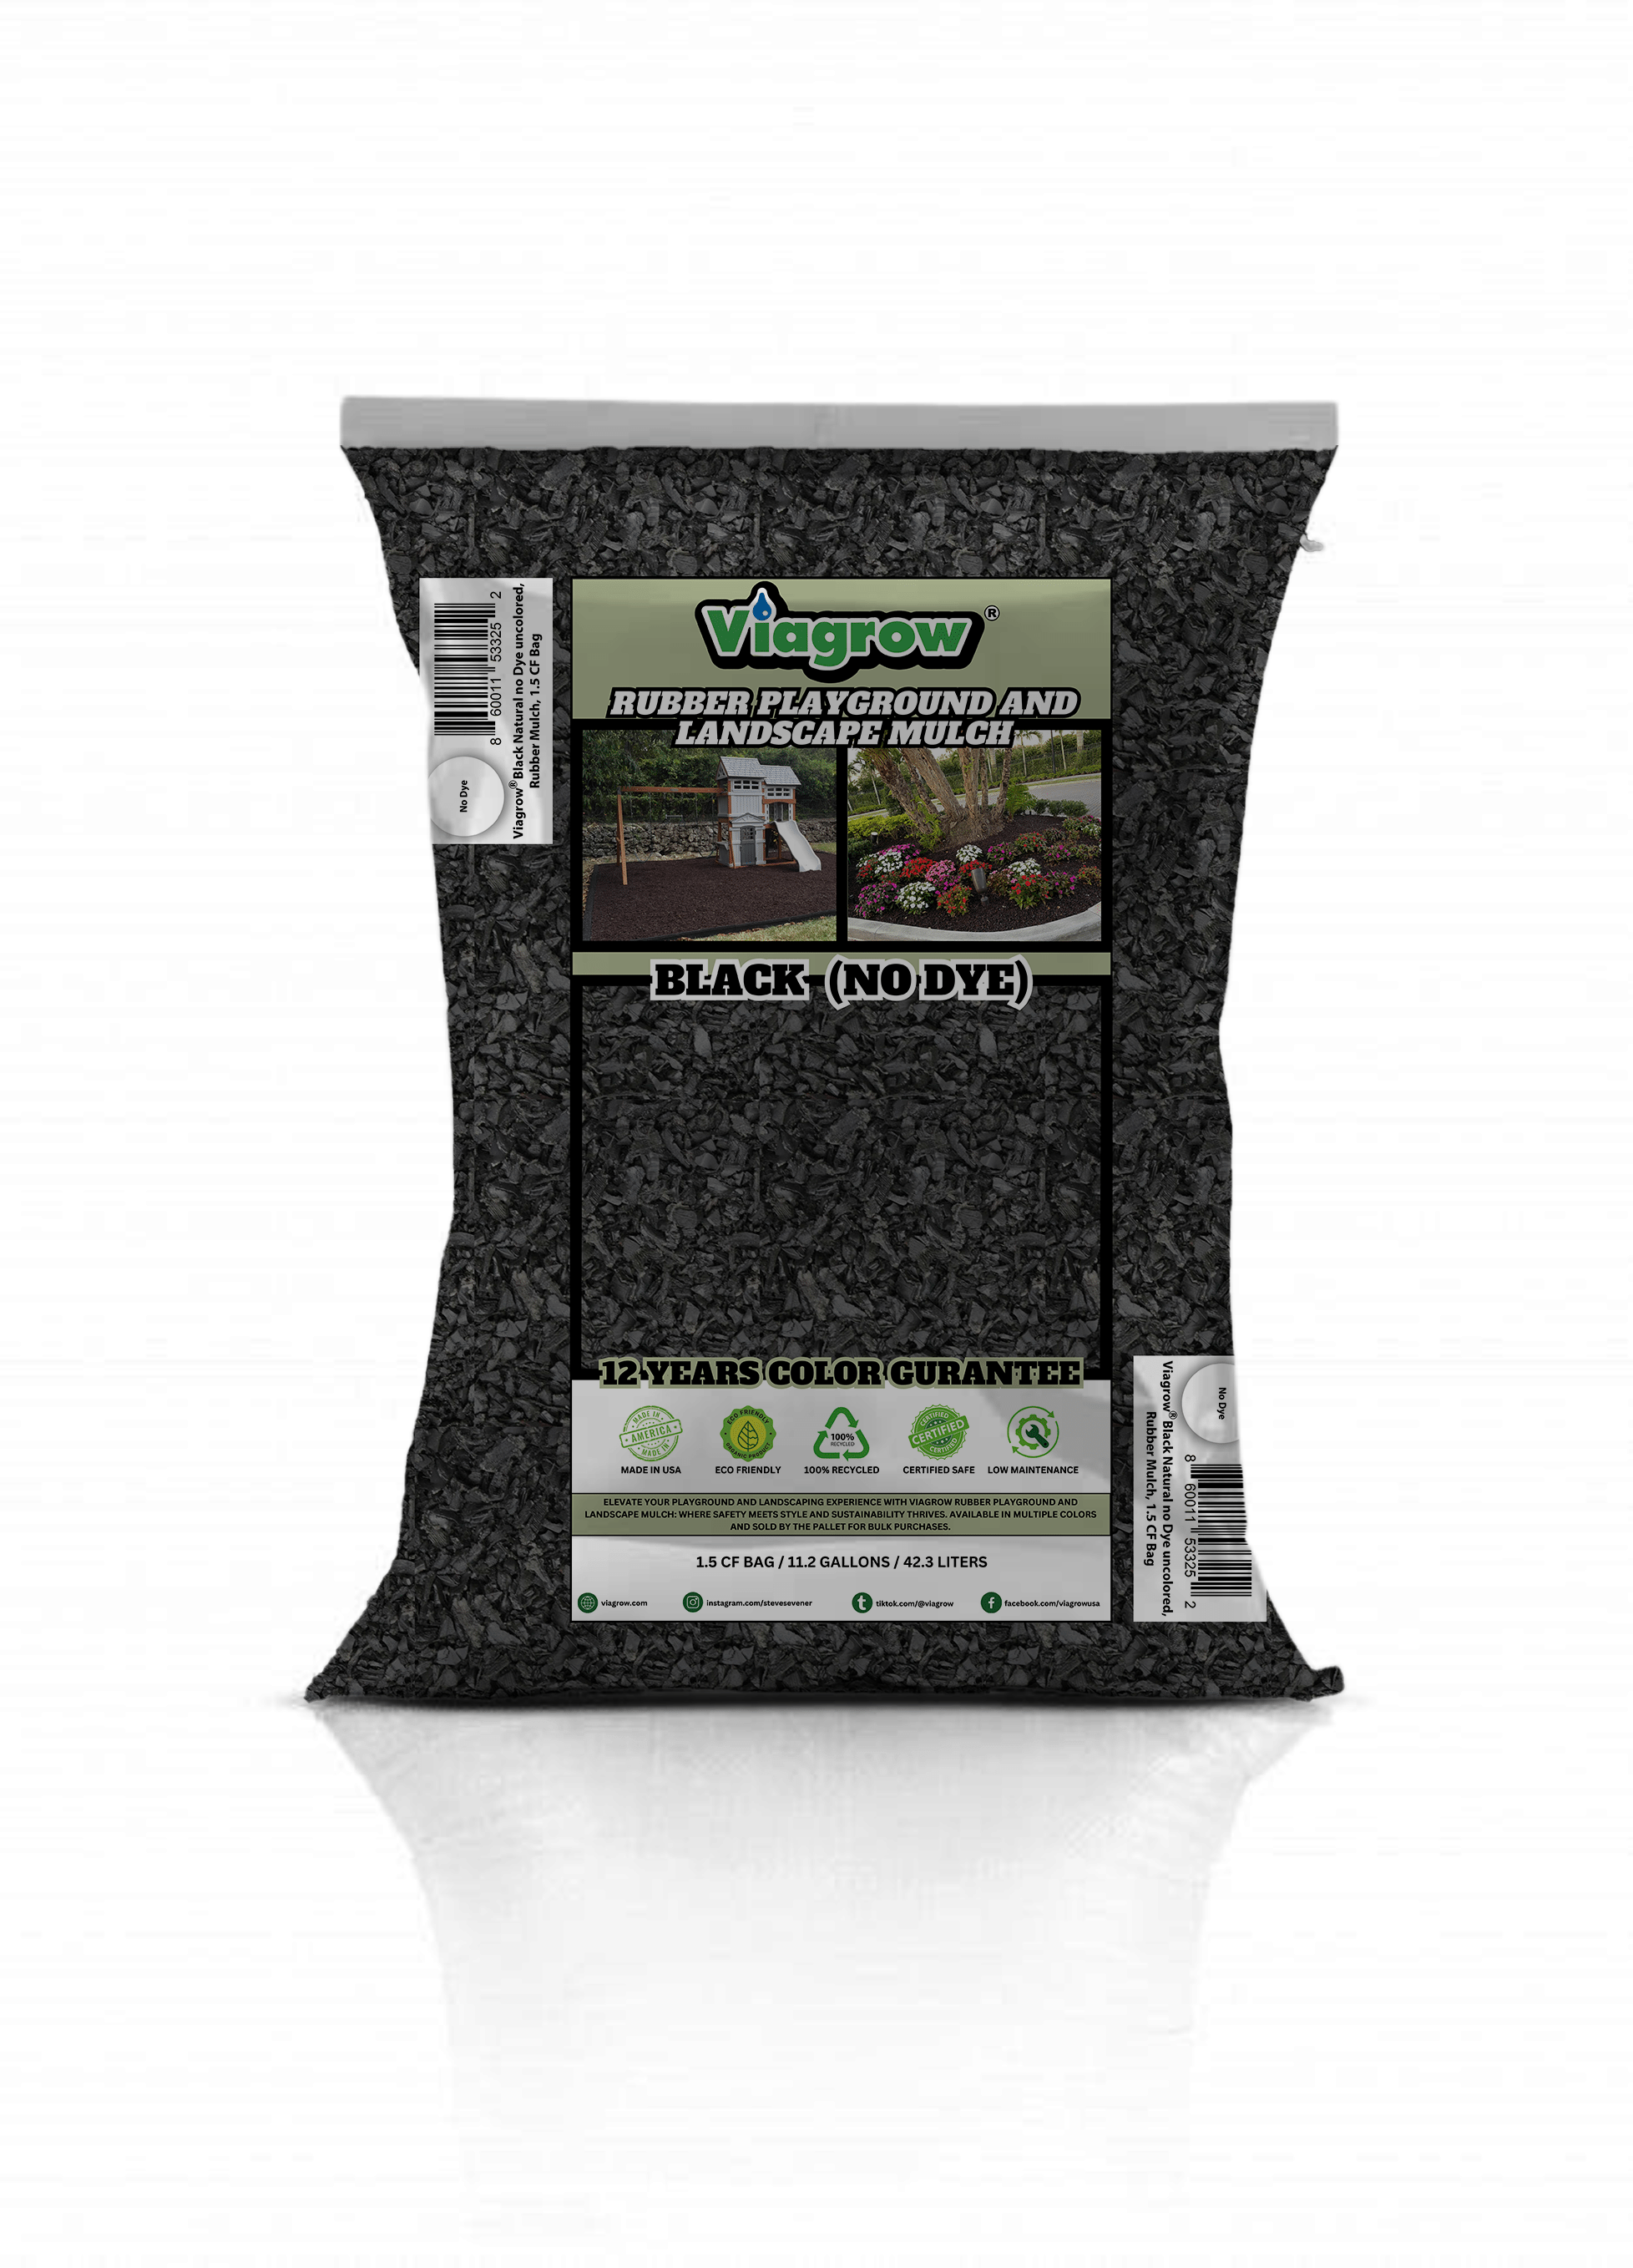 Black, No Dye, Rubber Playground & Landscape Mulch by Viagrow, 1.5 CF Bag ( 11.2 Gallons / 42.3 Liters)